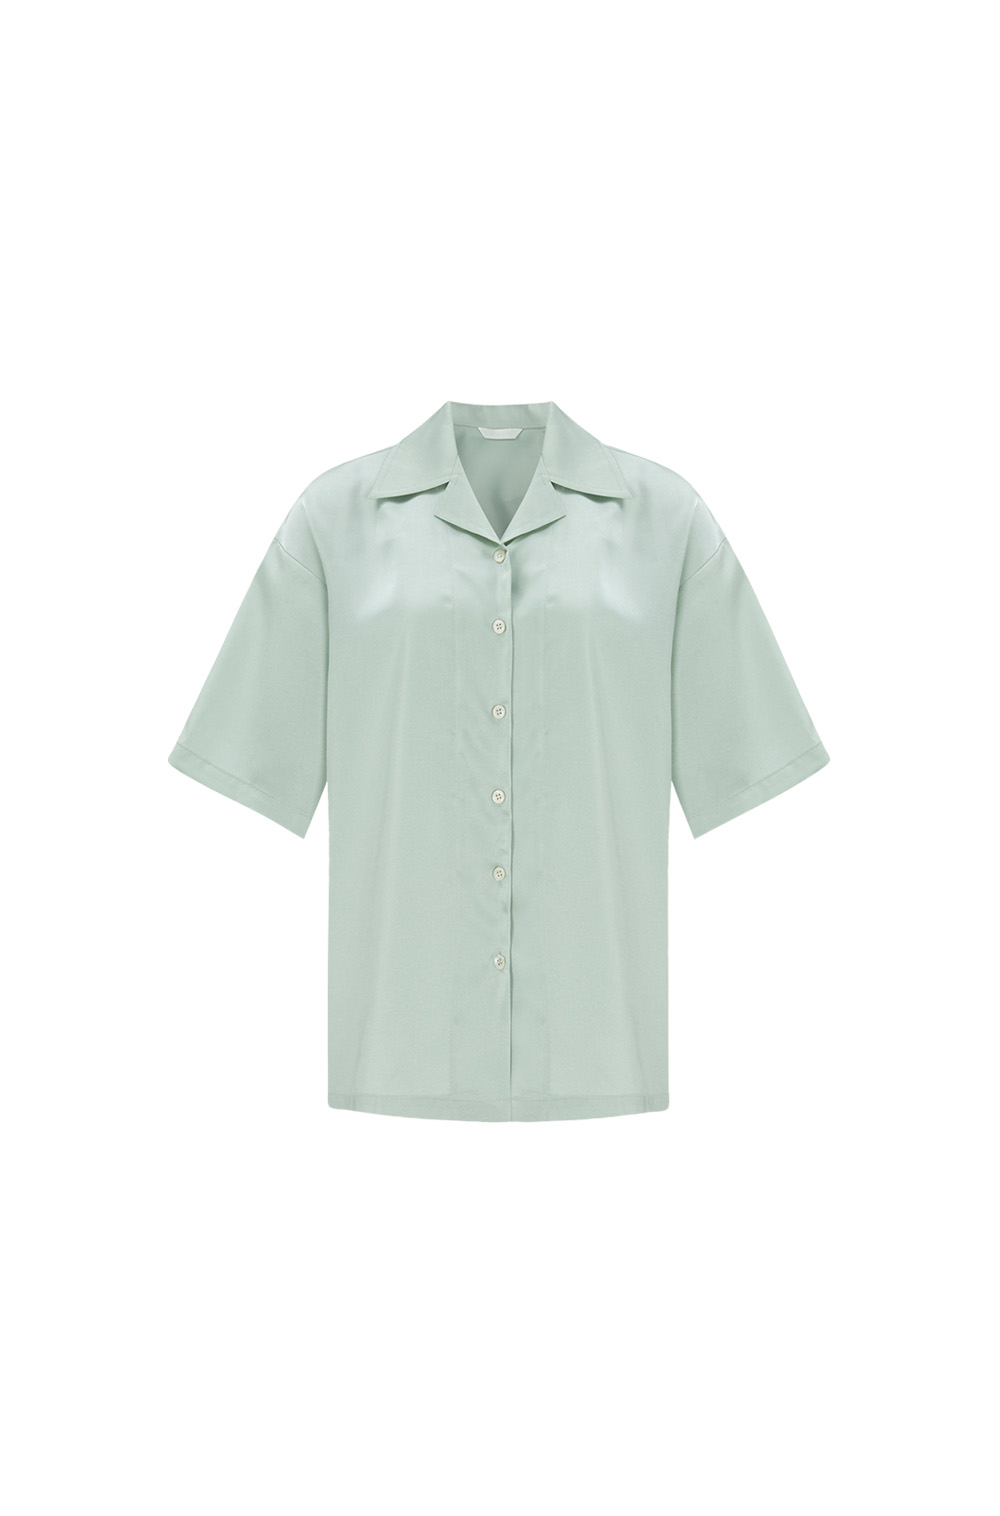 Tailored Collar Shirt (Olive mint)